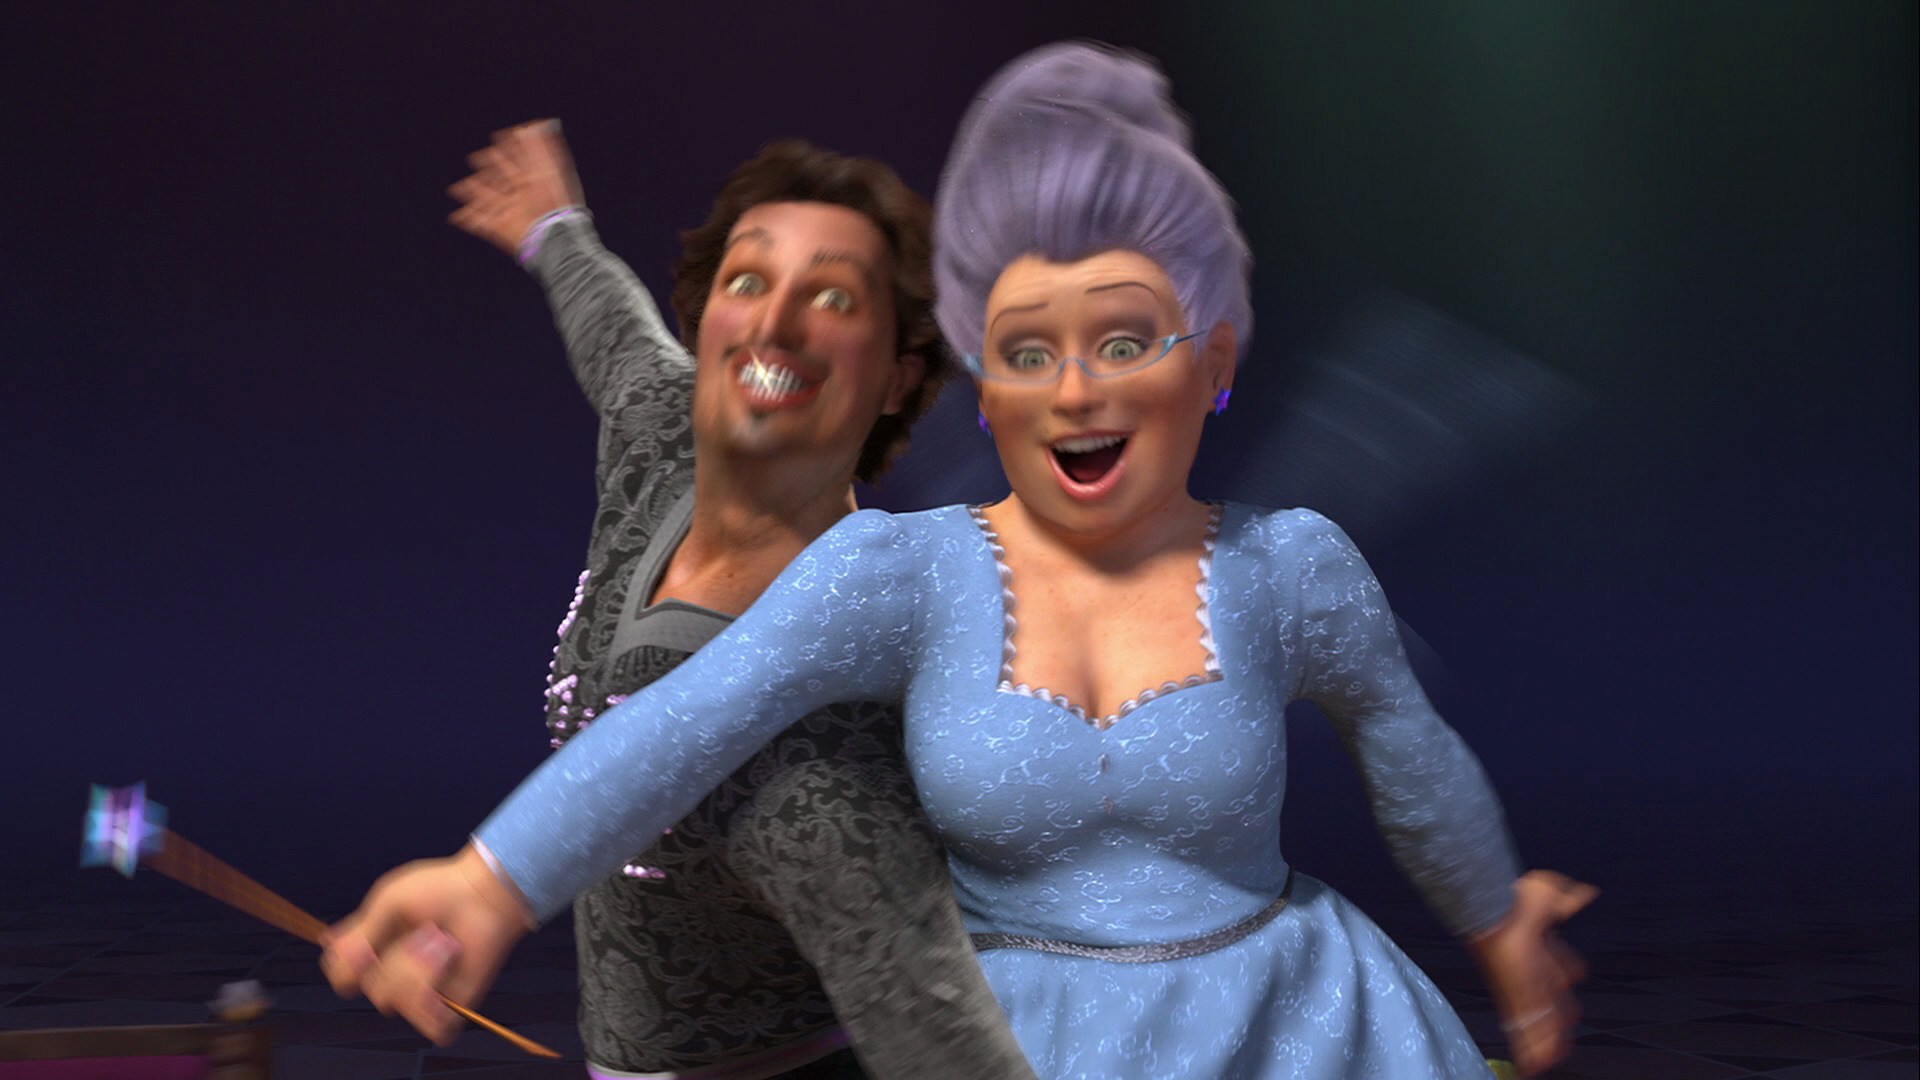 song-fairy-godmother-song-wikishrek-fandom-powered-by-wikia